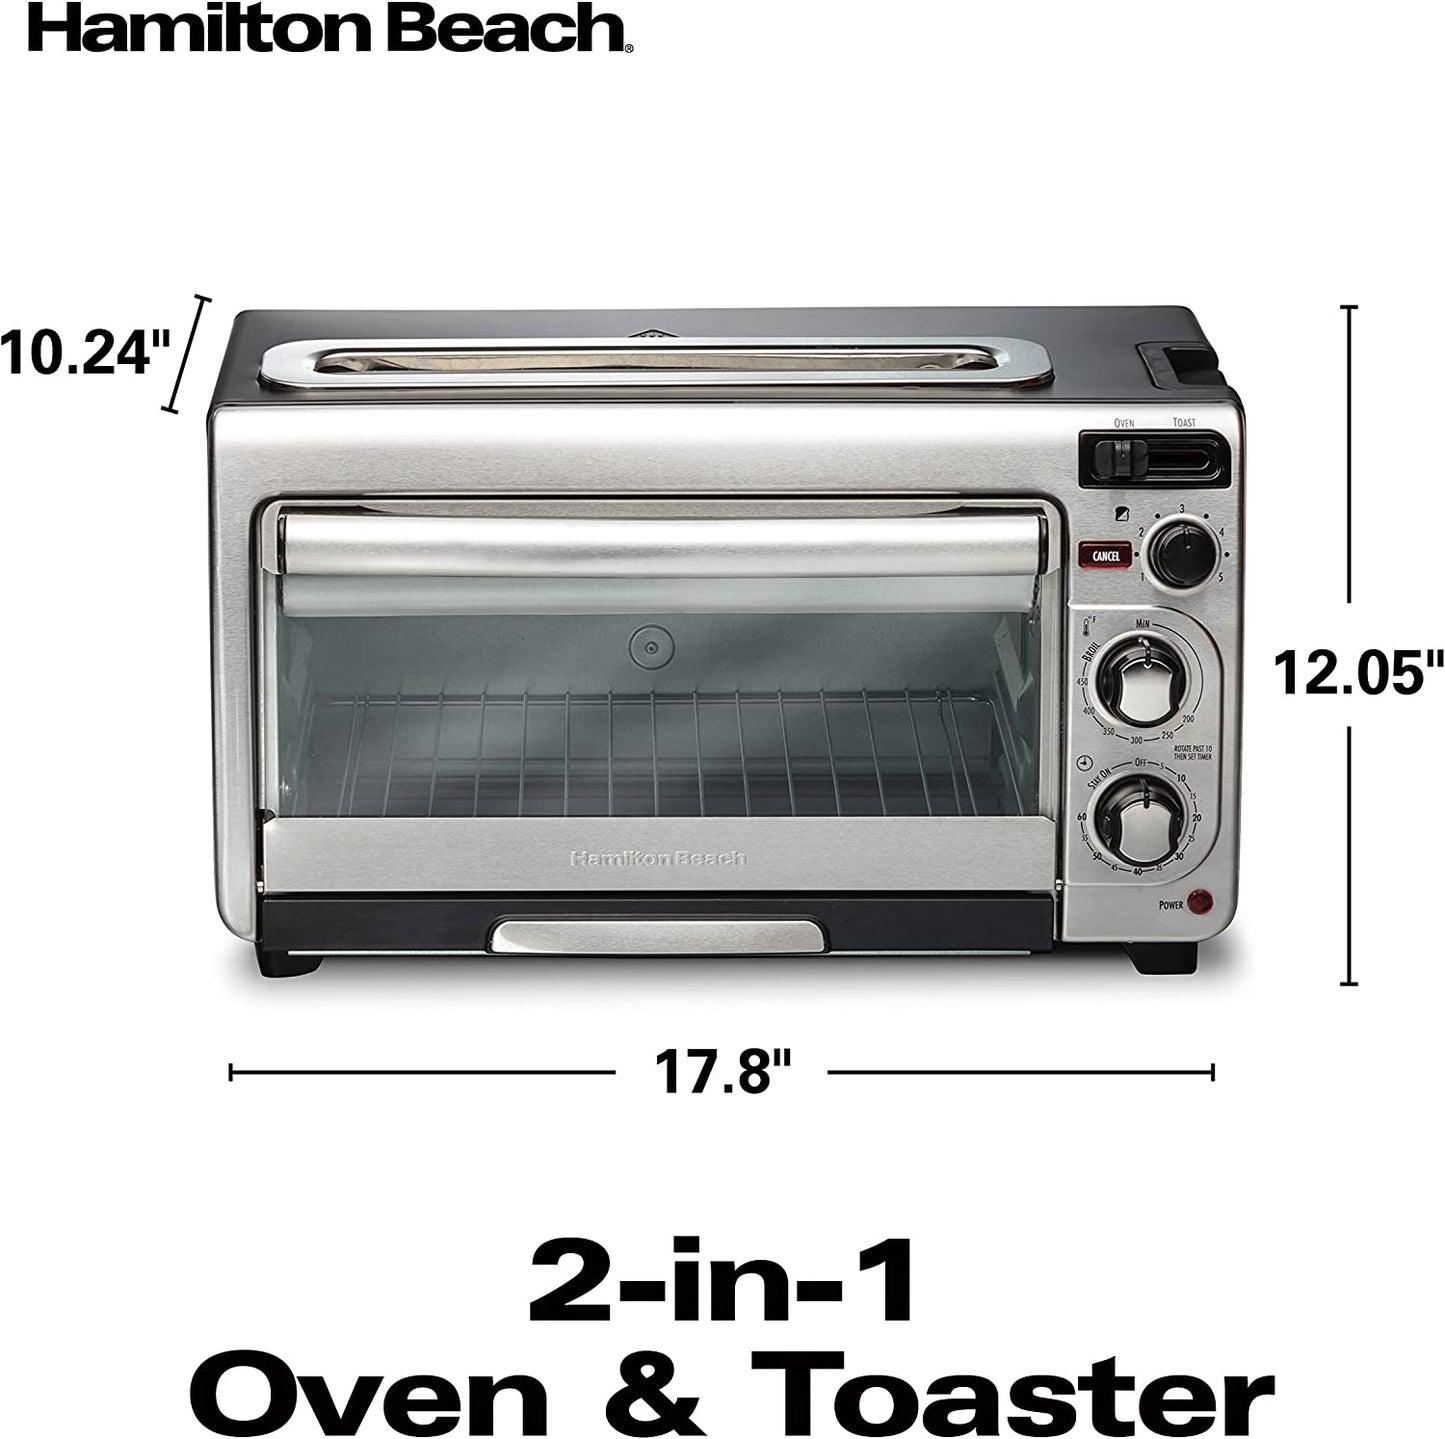 Multifunctional Stainless Steel Countertop Toaster Oven with Long Slot 2 Slice Toaster, 60 Minute Timer, Automatic Shut Off, and Shade Selector